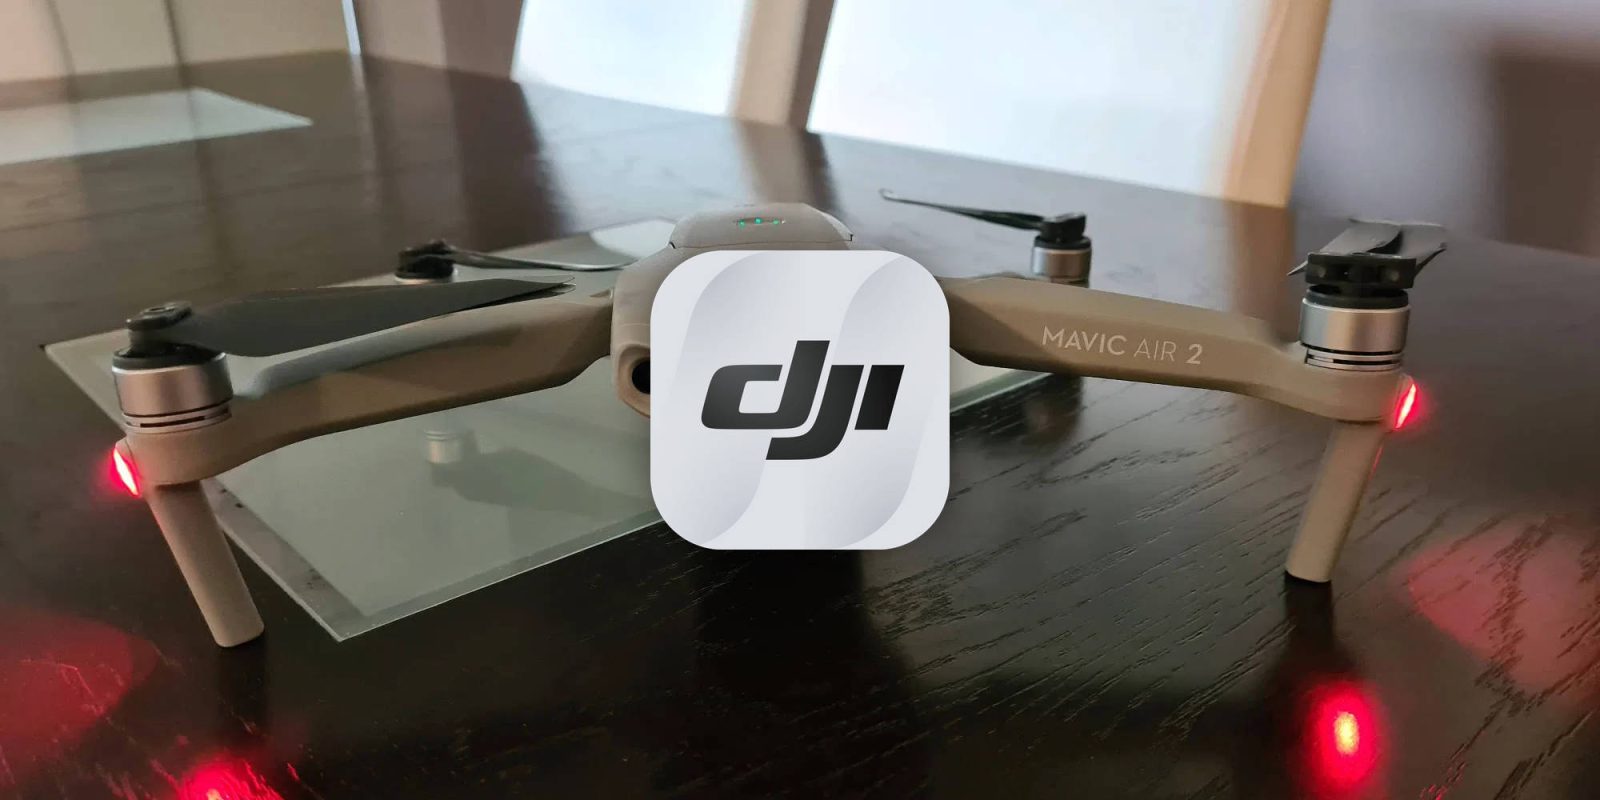 DJI Fly Mavic Air Fly's compass-style indicator update